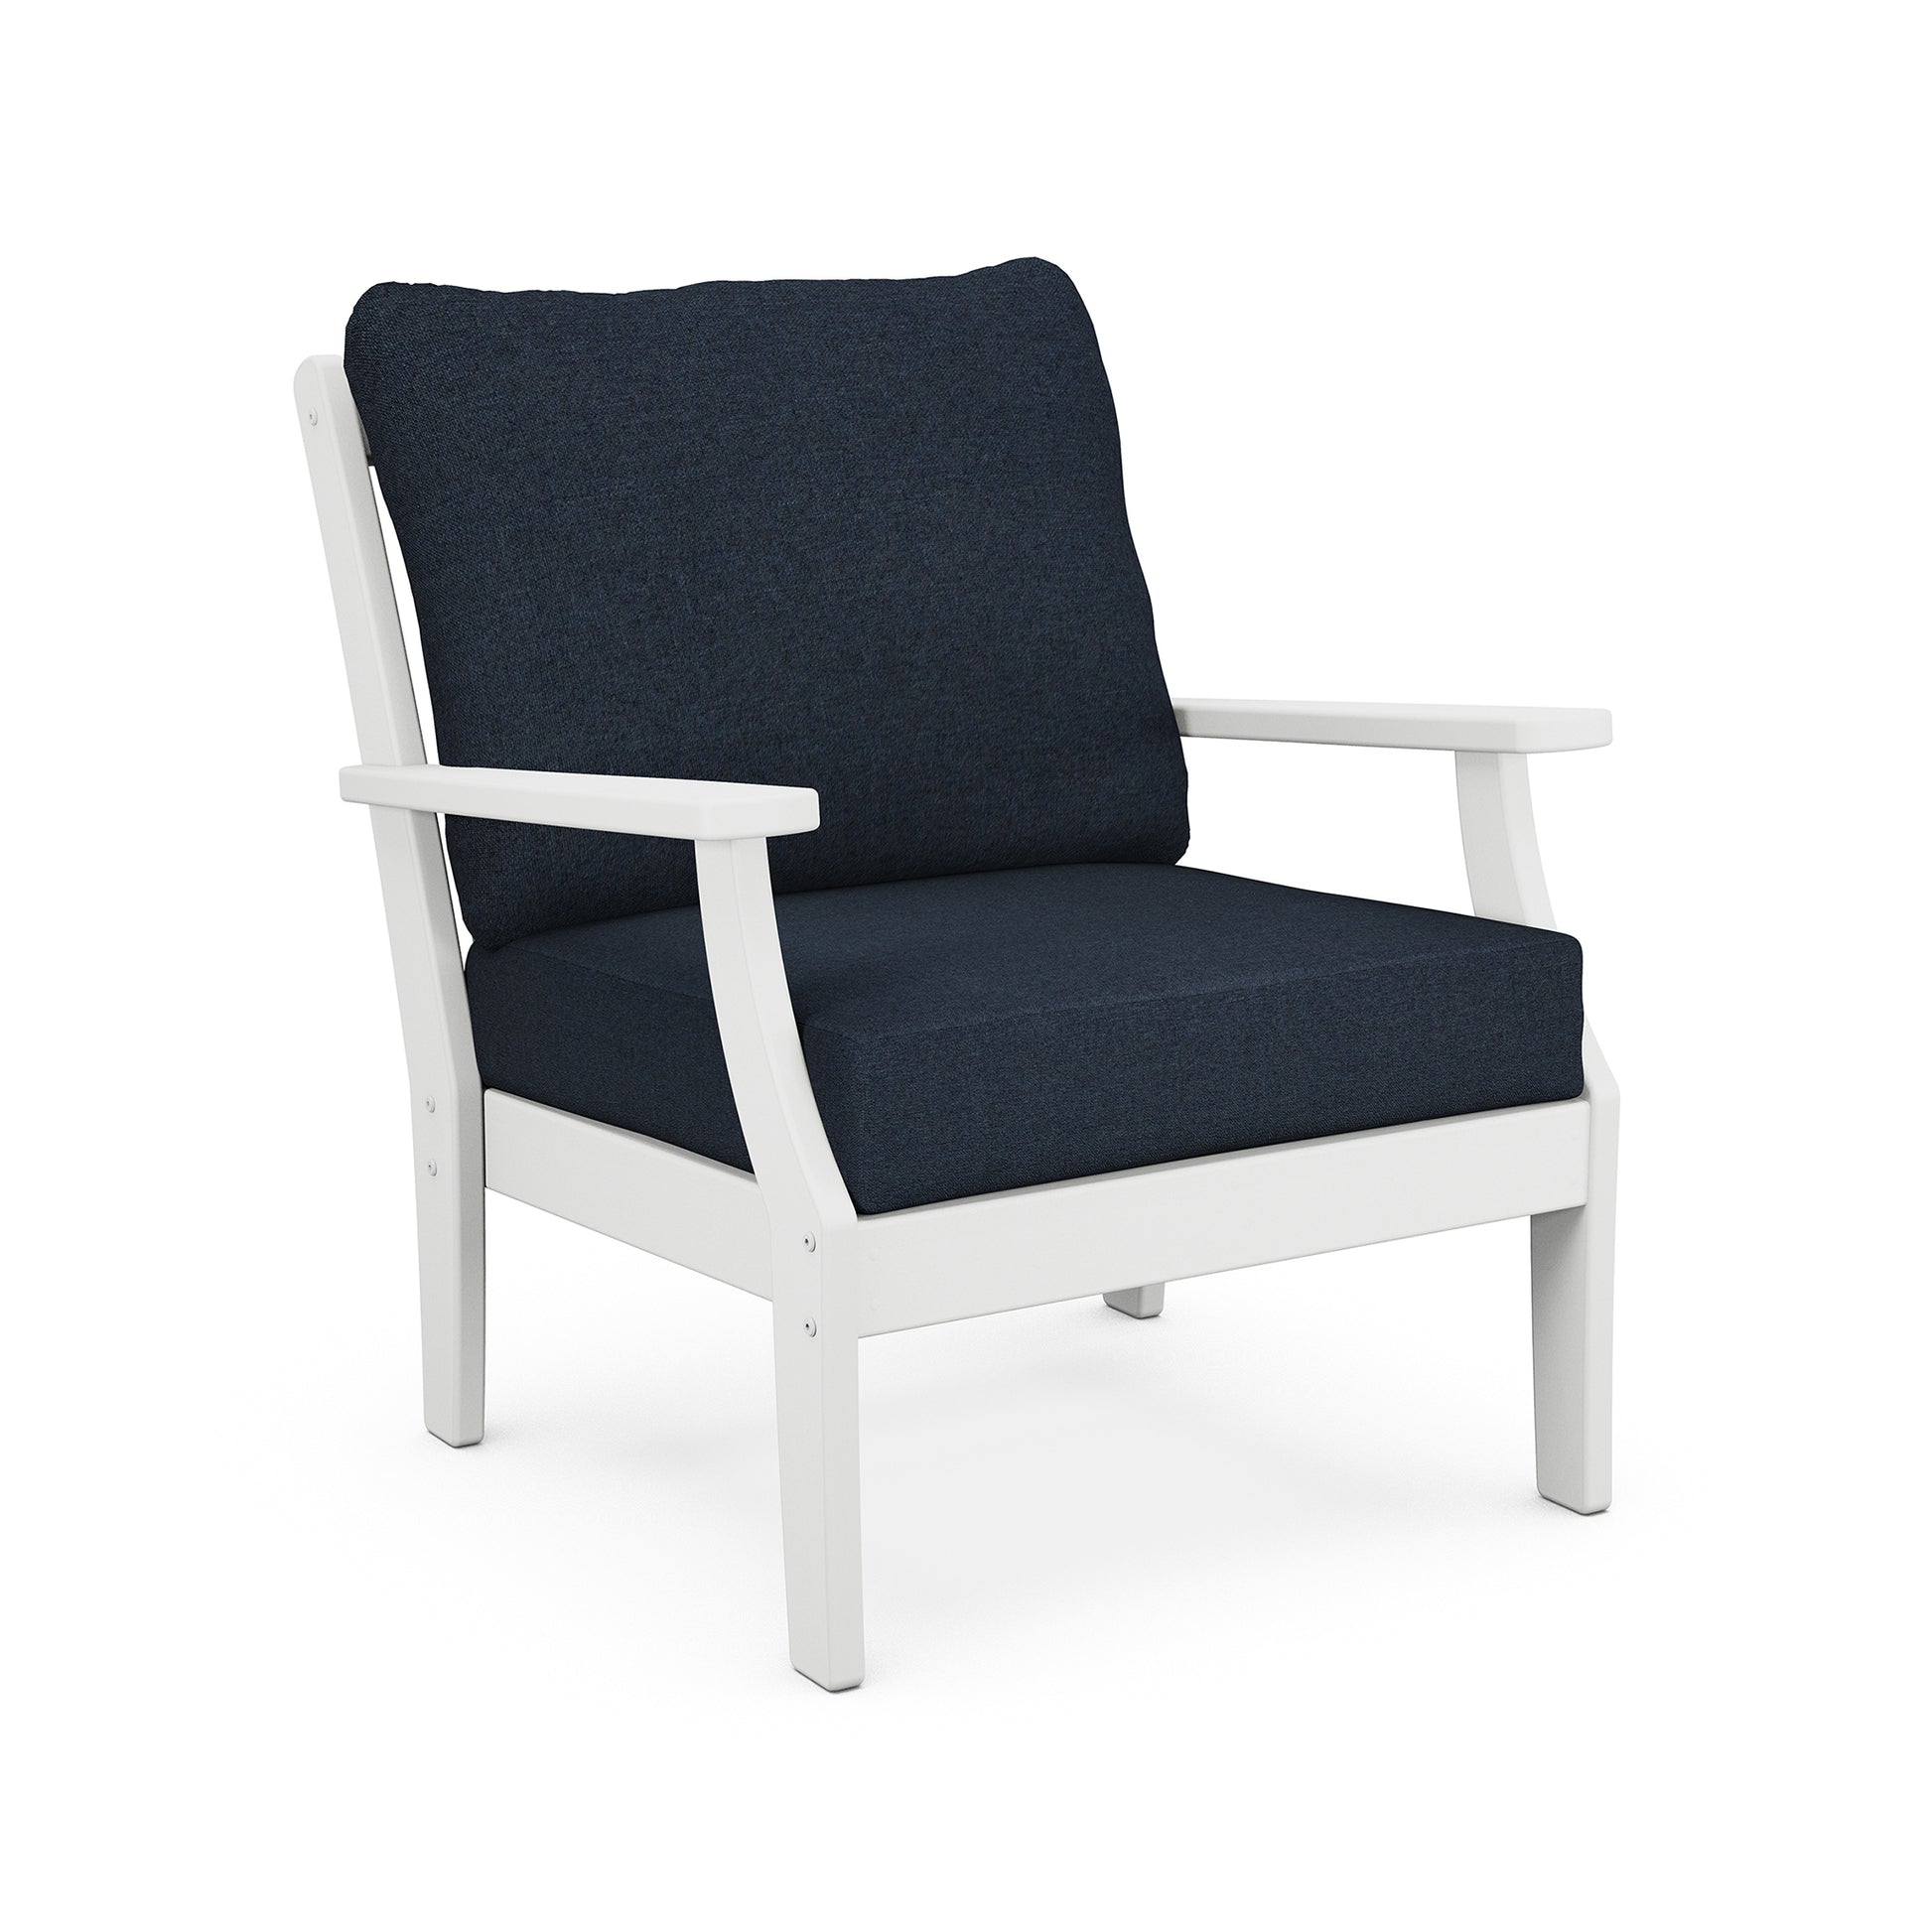 A modern POLYWOOD® Braxton Deep Seating Chair with a white frame and deep blue cushions on a white background. the chair design is simple, featuring broad armrests and a straight